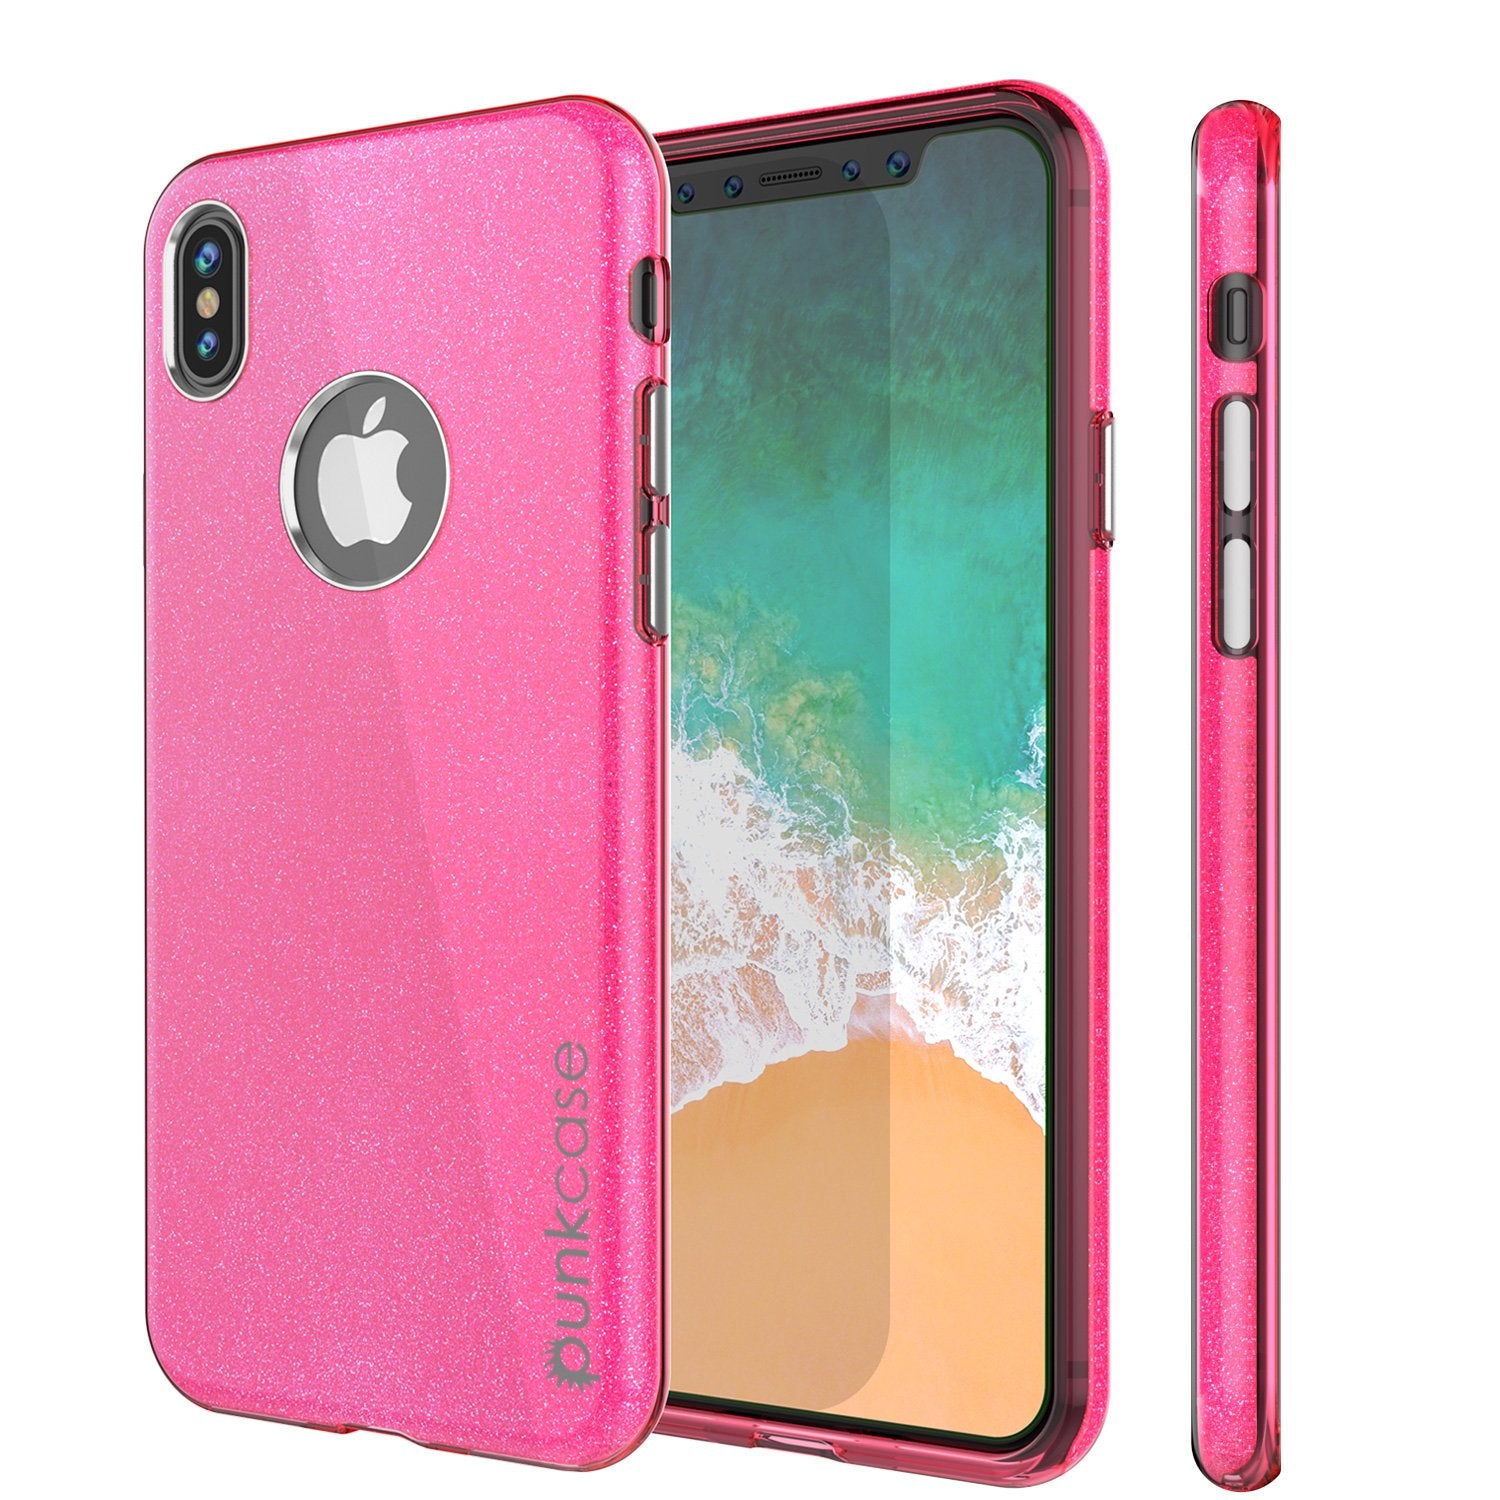 iPhone X Case, Punkcase Galactic 2.0 Series Ultra Slim w/ Tempered Glass Screen Protector | [Pink]